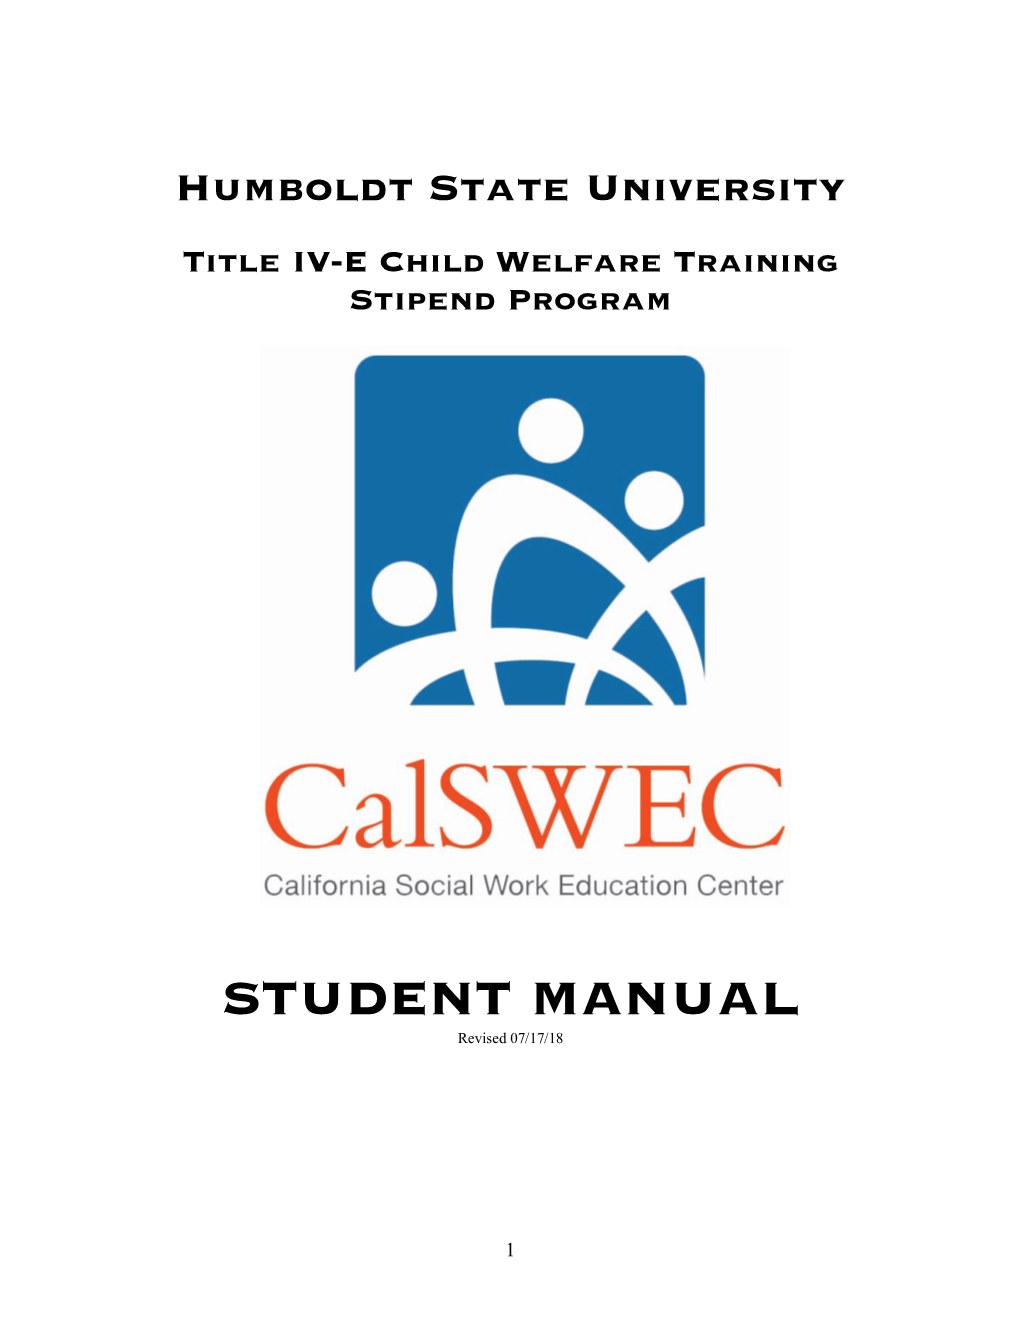 STUDENT MANUAL Revised 07/17/18